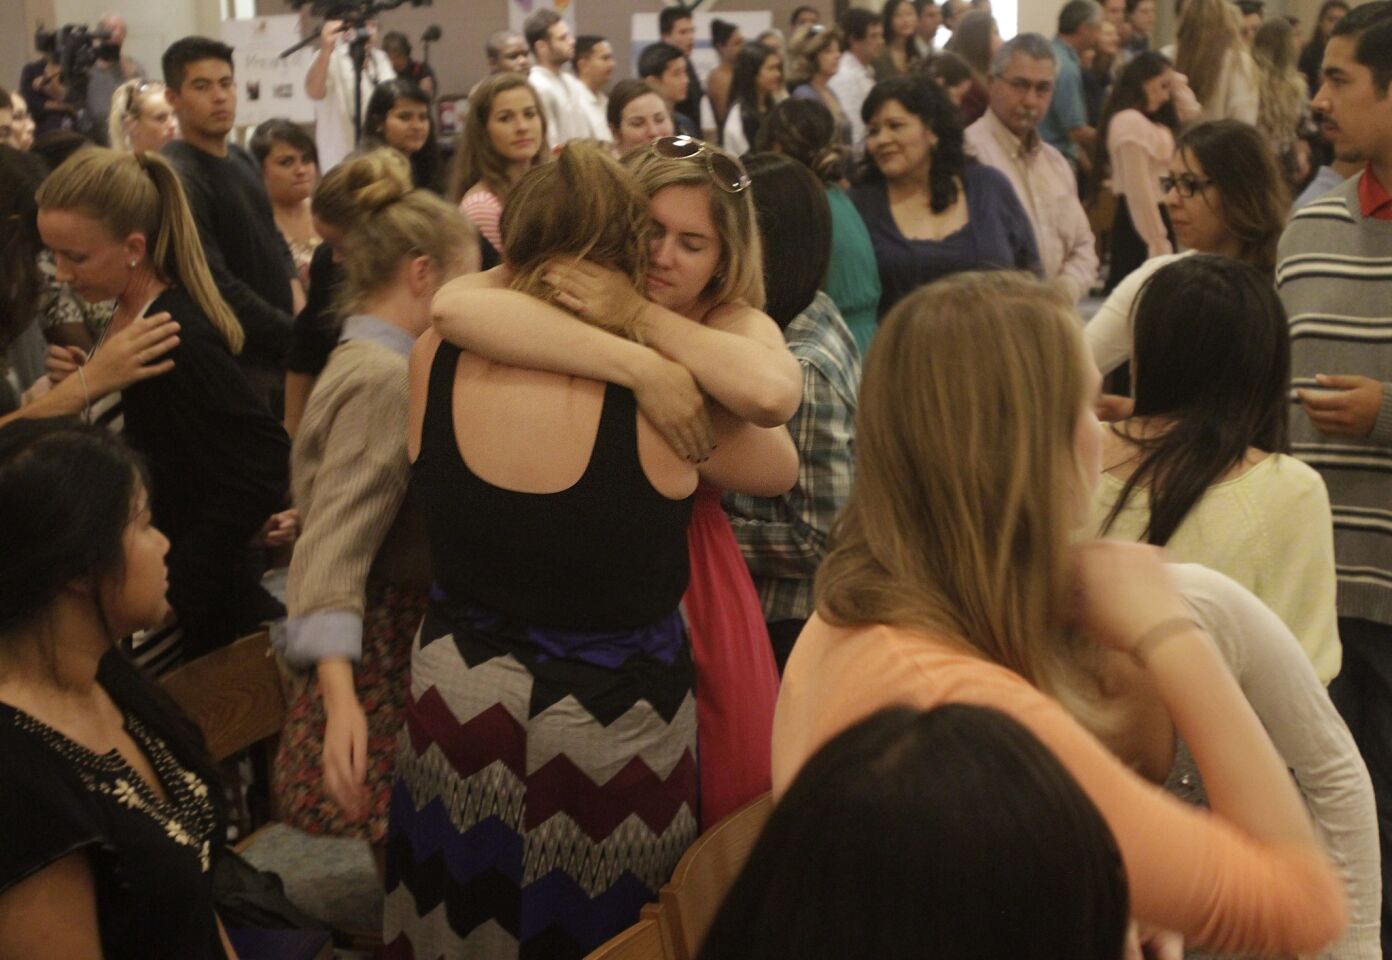 Congregants embrace during Mass at St. Mark's University Parish in Isla Vista to remember the victims of Friday night's violent rampage that left seven dead.